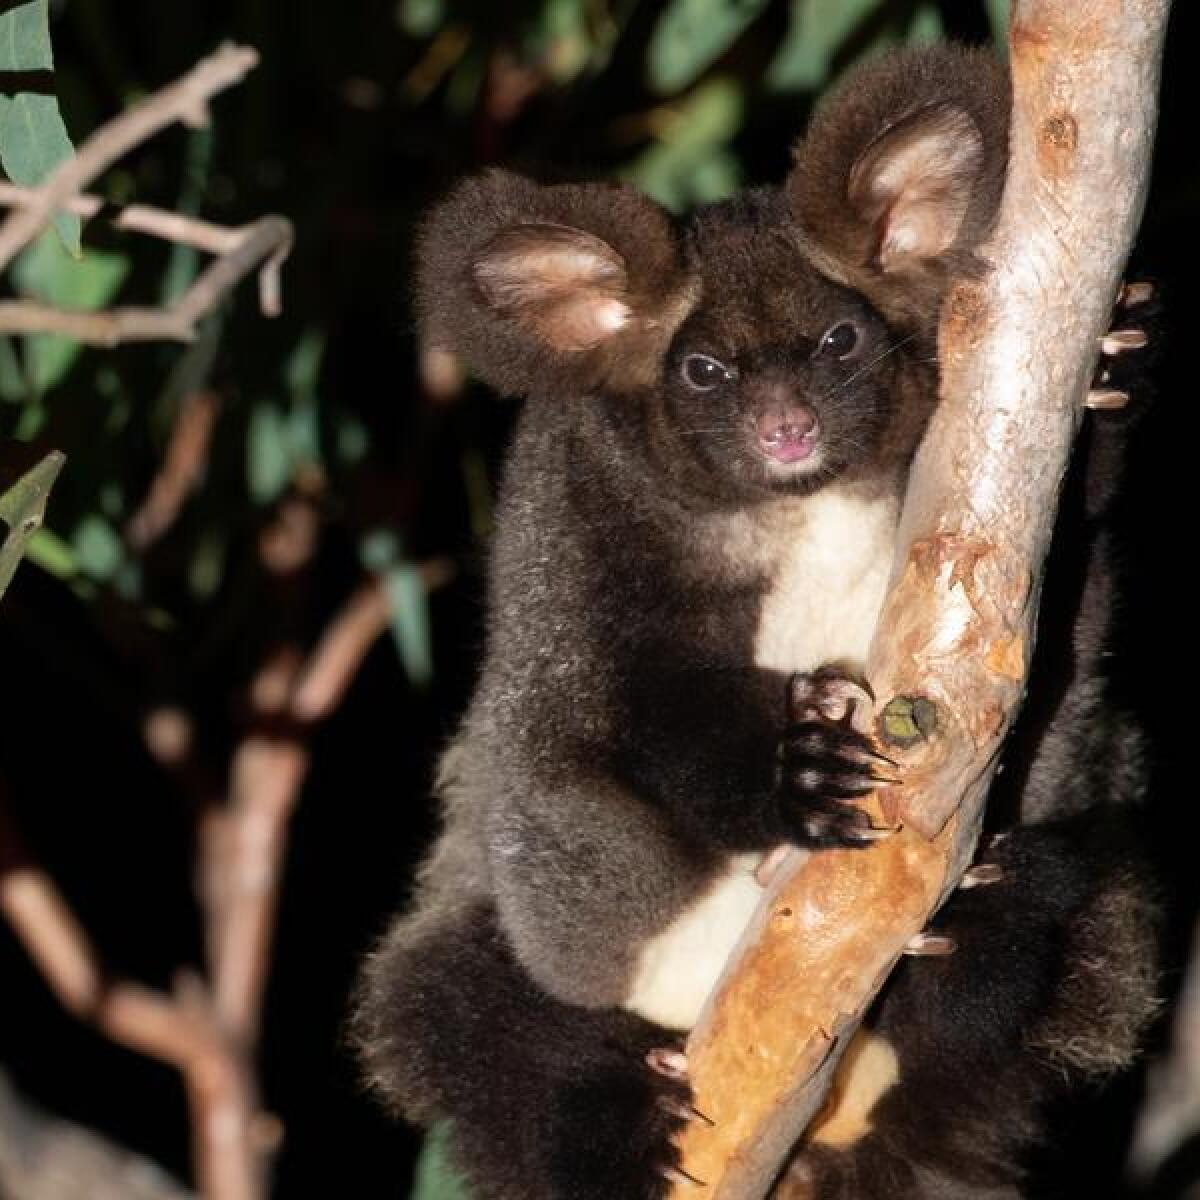 A greater glider